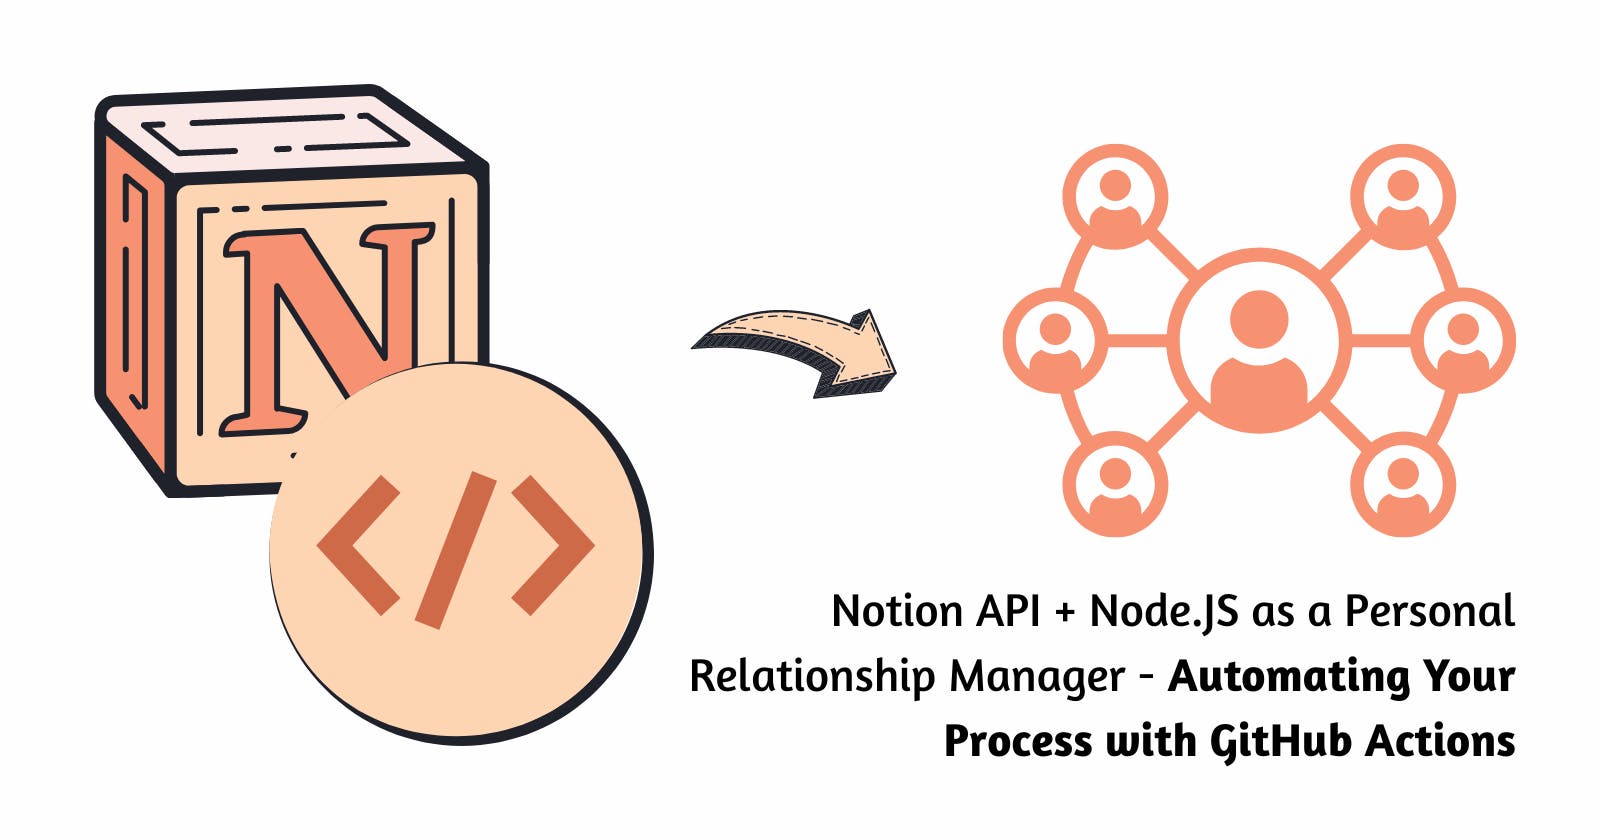 Building a (Personal) Relationship Manager with Notion API - Automating Your Process with GitHub Actions.